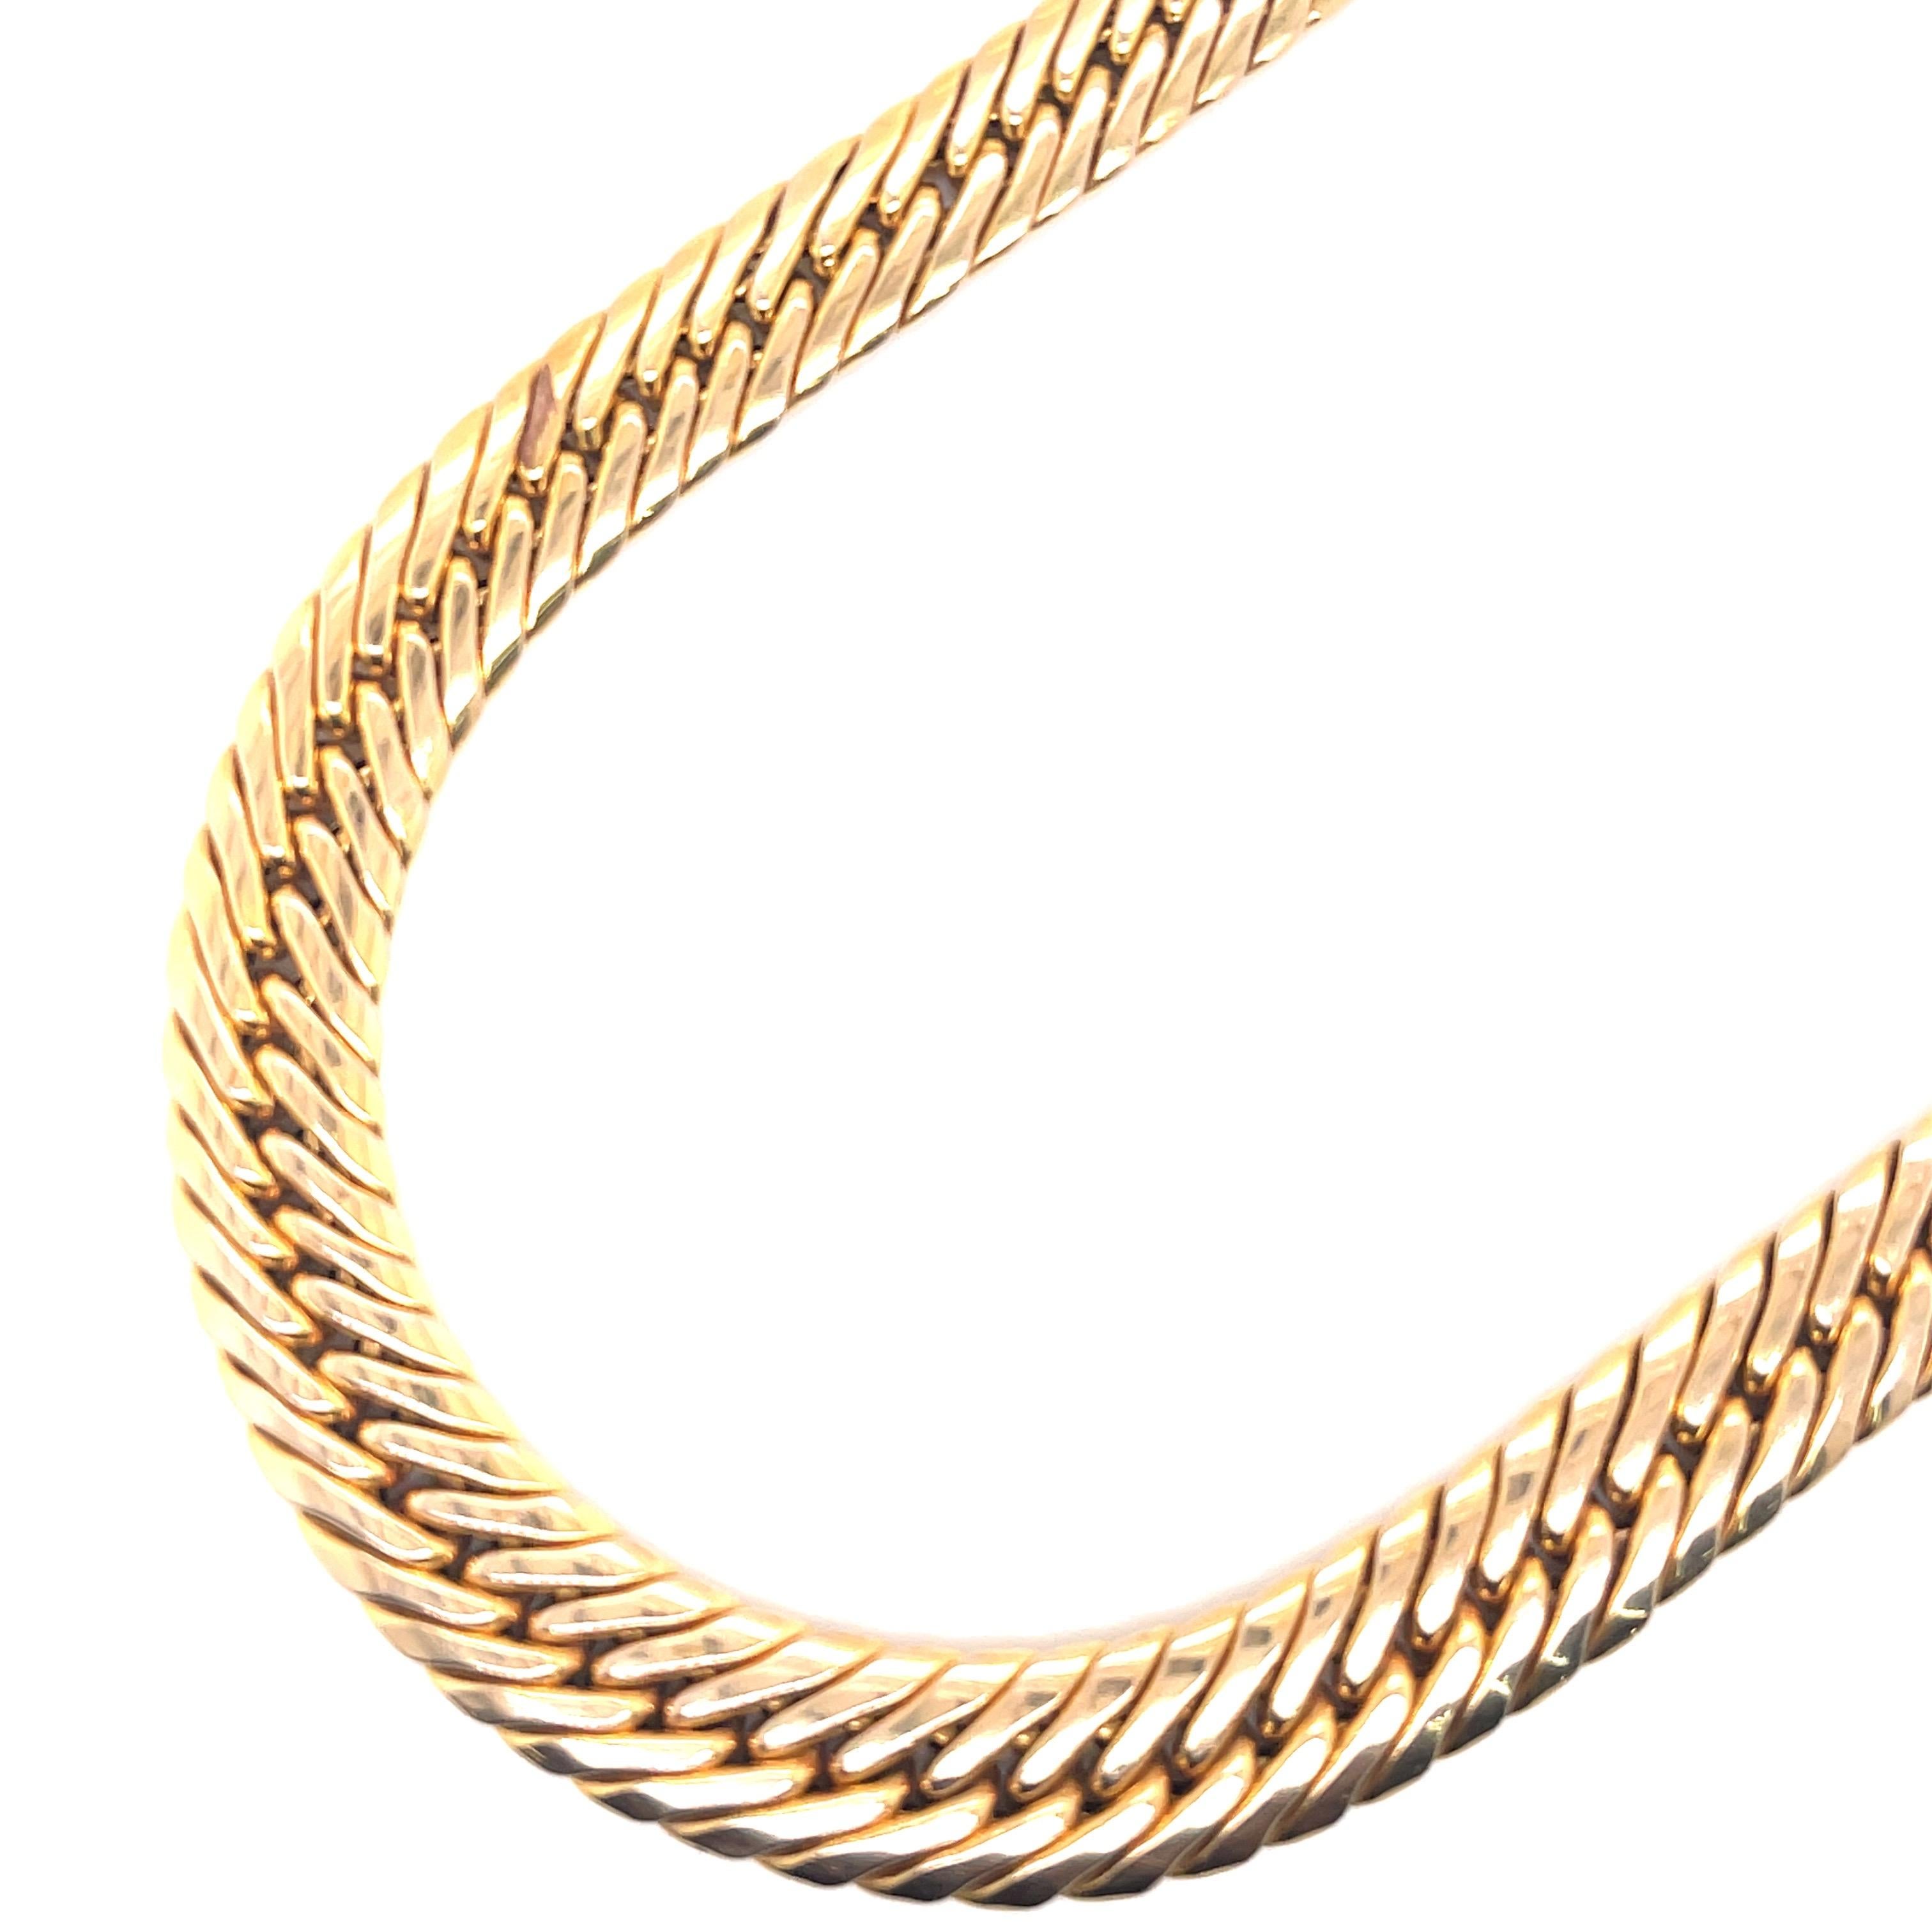 Signed UnoAerre this snake motif necklace is crafted in 14 karat yellow gold weighing 36.1 grams. 
Made in Italy